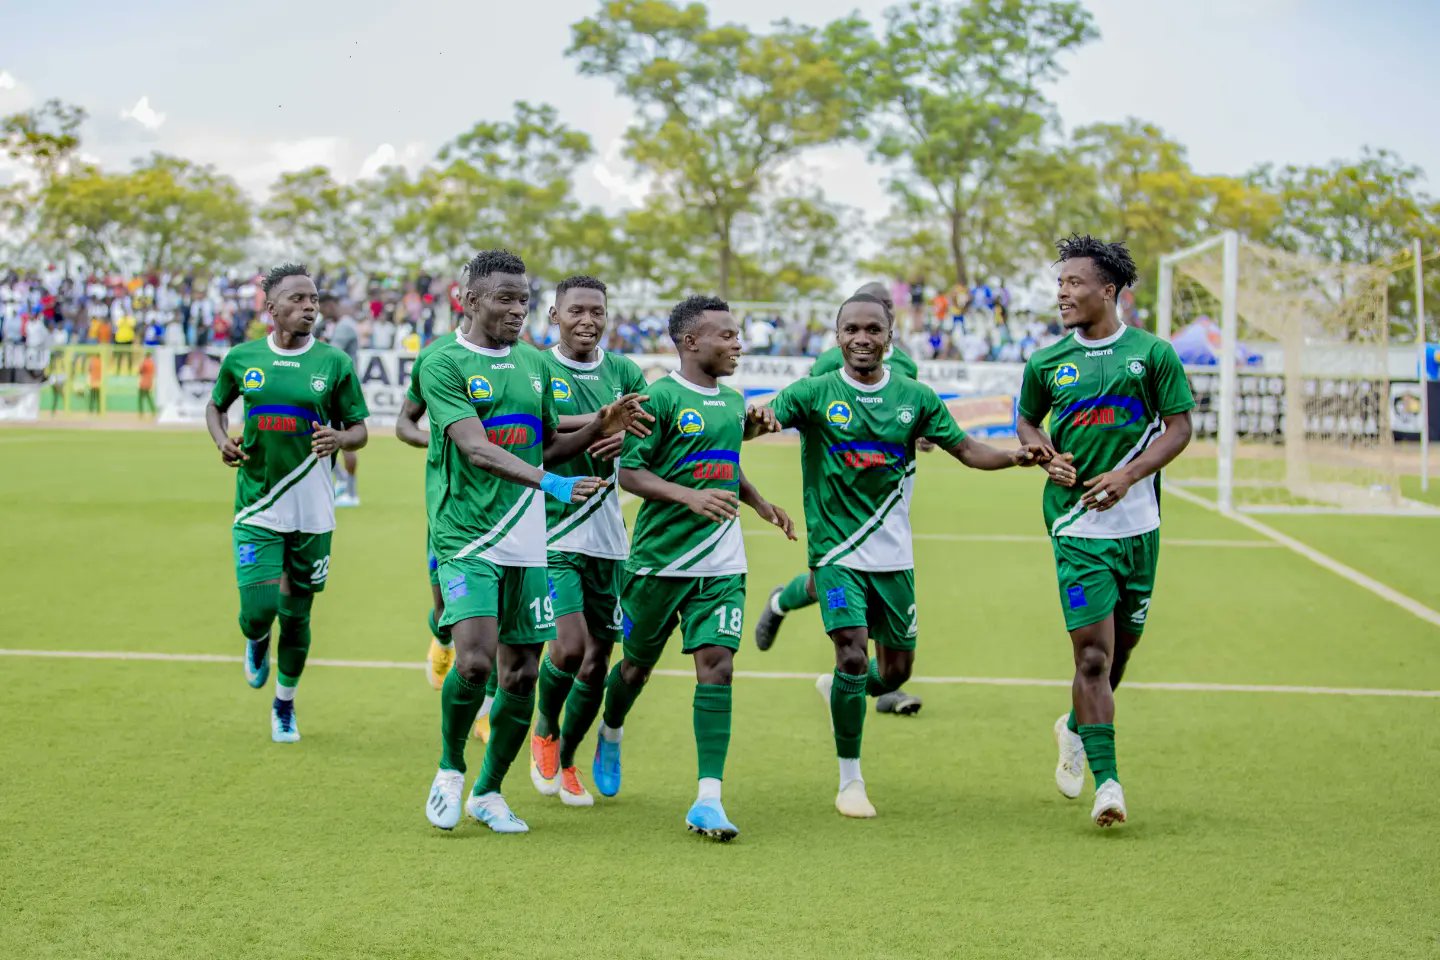 Kiyovu players celebrate after scoring a goal in a recent match. The Green Baggies slipped up in the title race after being held 1-1 by Etoile de l'est on Monday afternoon. courtesy